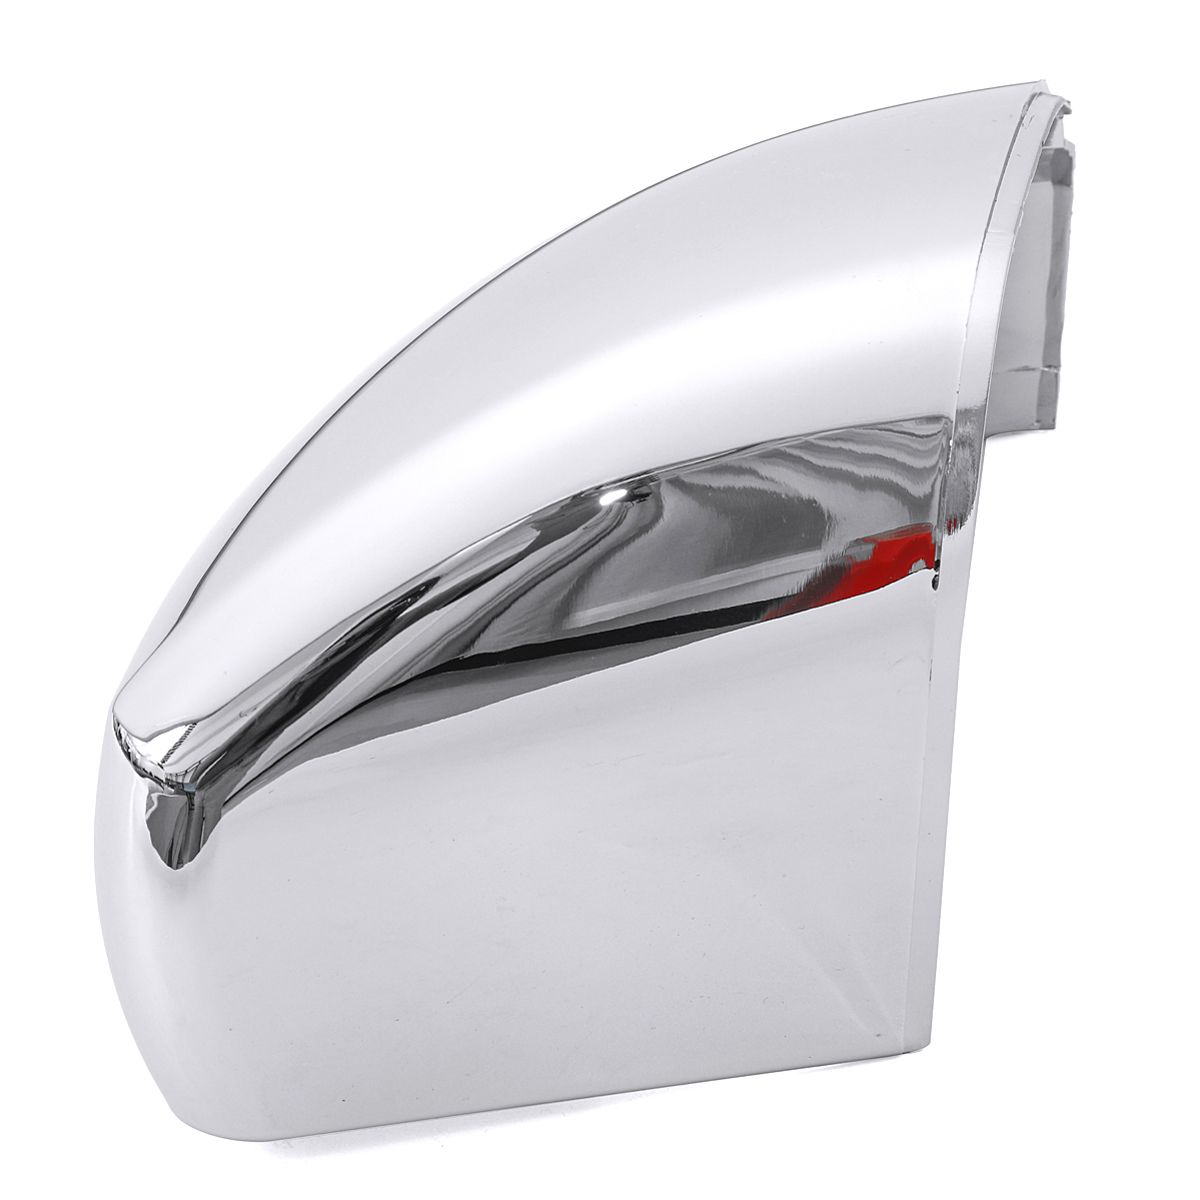 Car-LeftRight-Rearview-Mirror-Cover-White-for-Range-Rover-Sport-2014-1639794